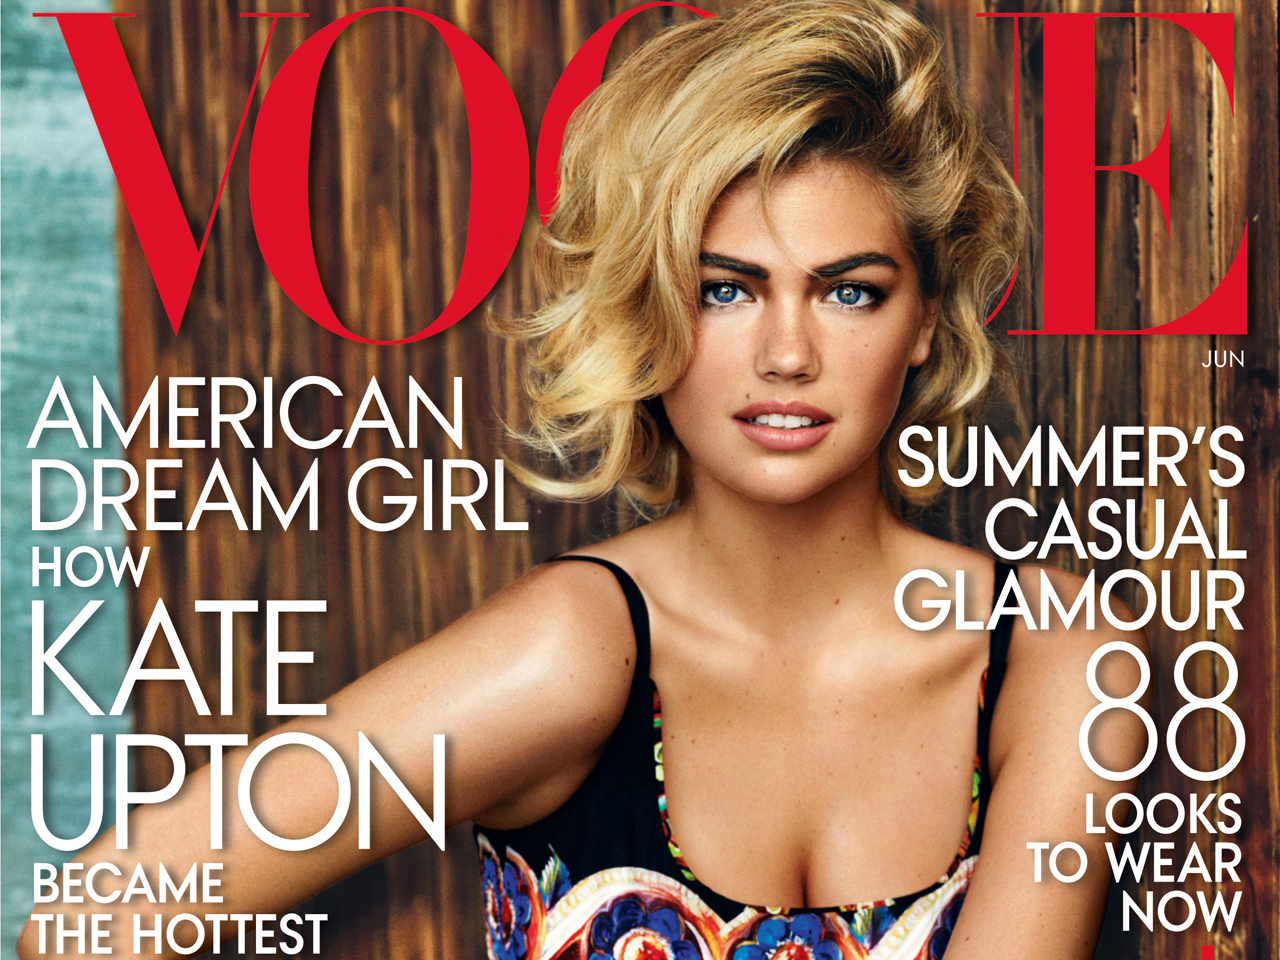 Kate Upton goes Vogue, covering the magazine's June issue - CBS News